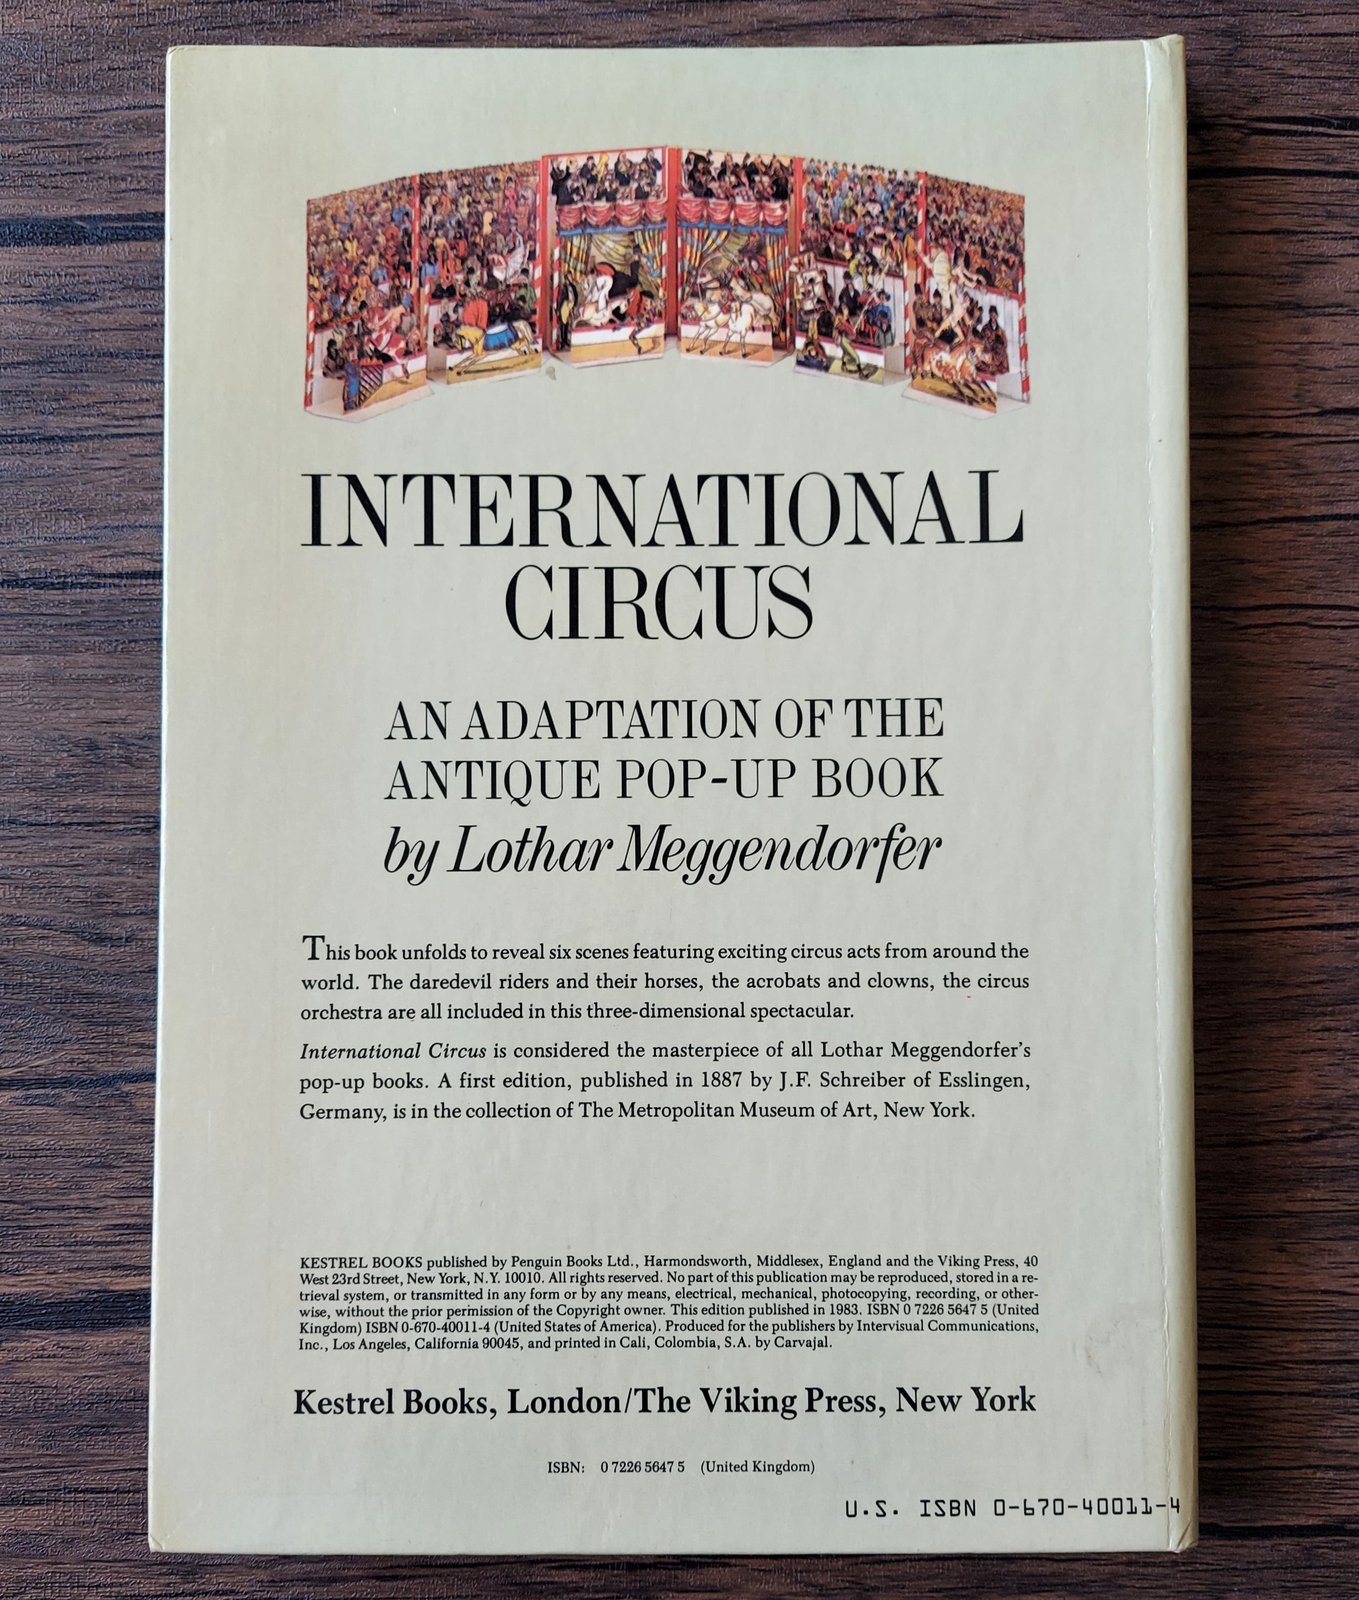 Lothar Meggendorfer's International Circus: A Reproduction of the 